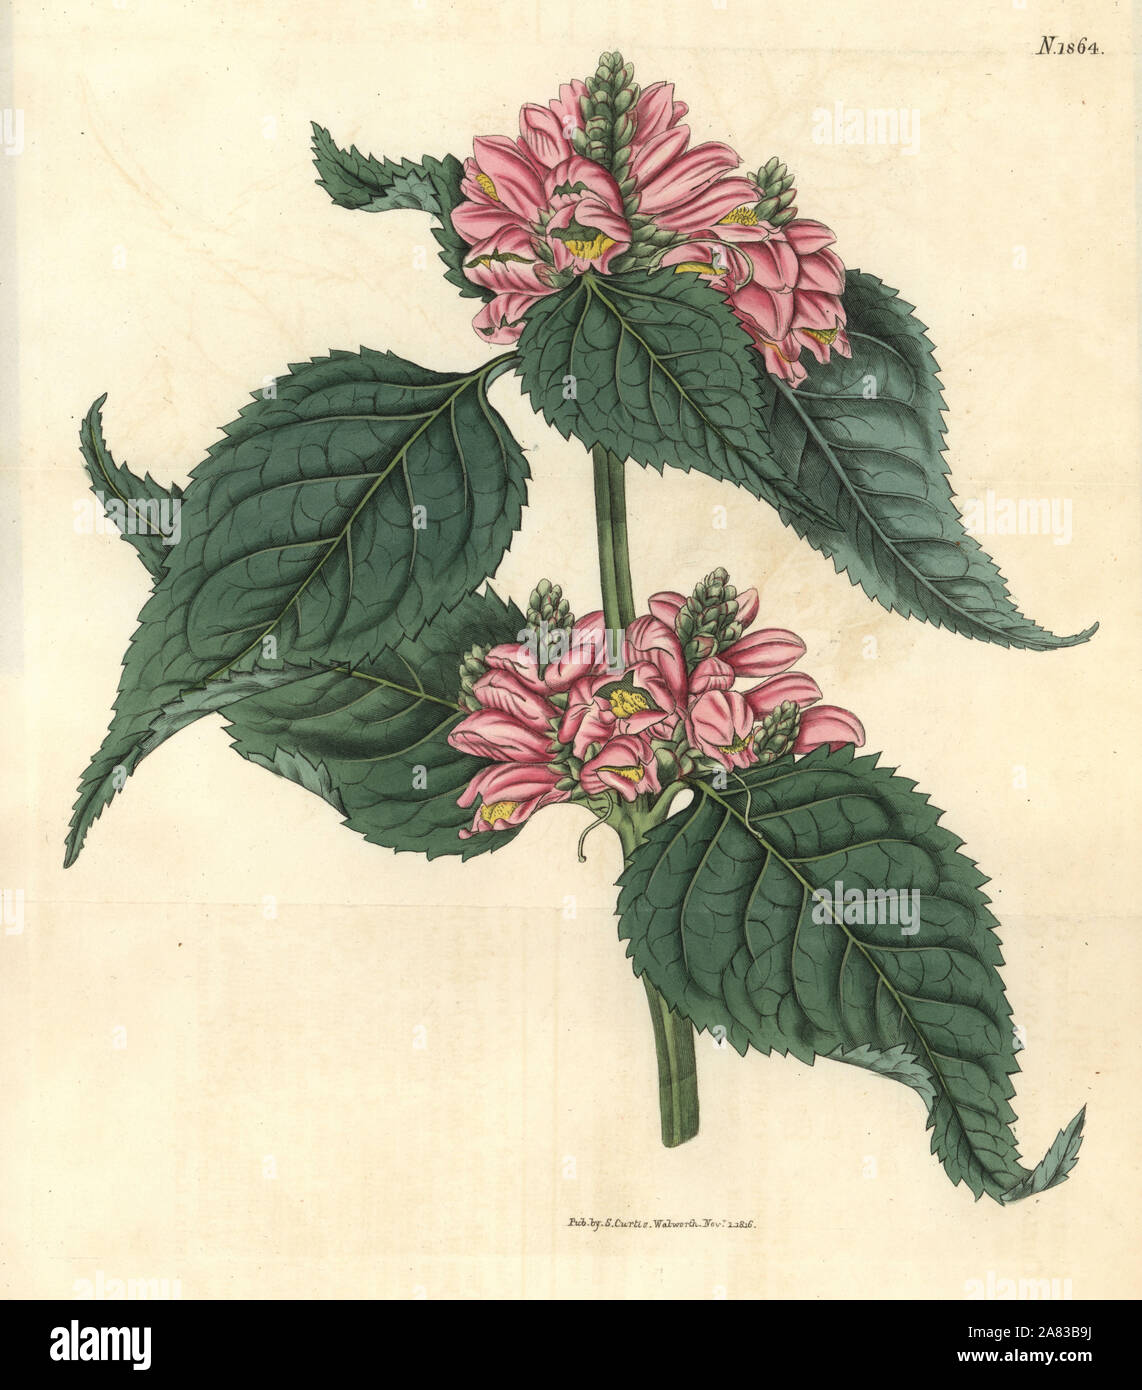 Lyon's chelone, Chelone lyonii (Chelone major). Handcoloured botanical engraving by Weddell from John Sims' Curtis's Botanical Magazine, Couchman, London, 1816. Stock Photo